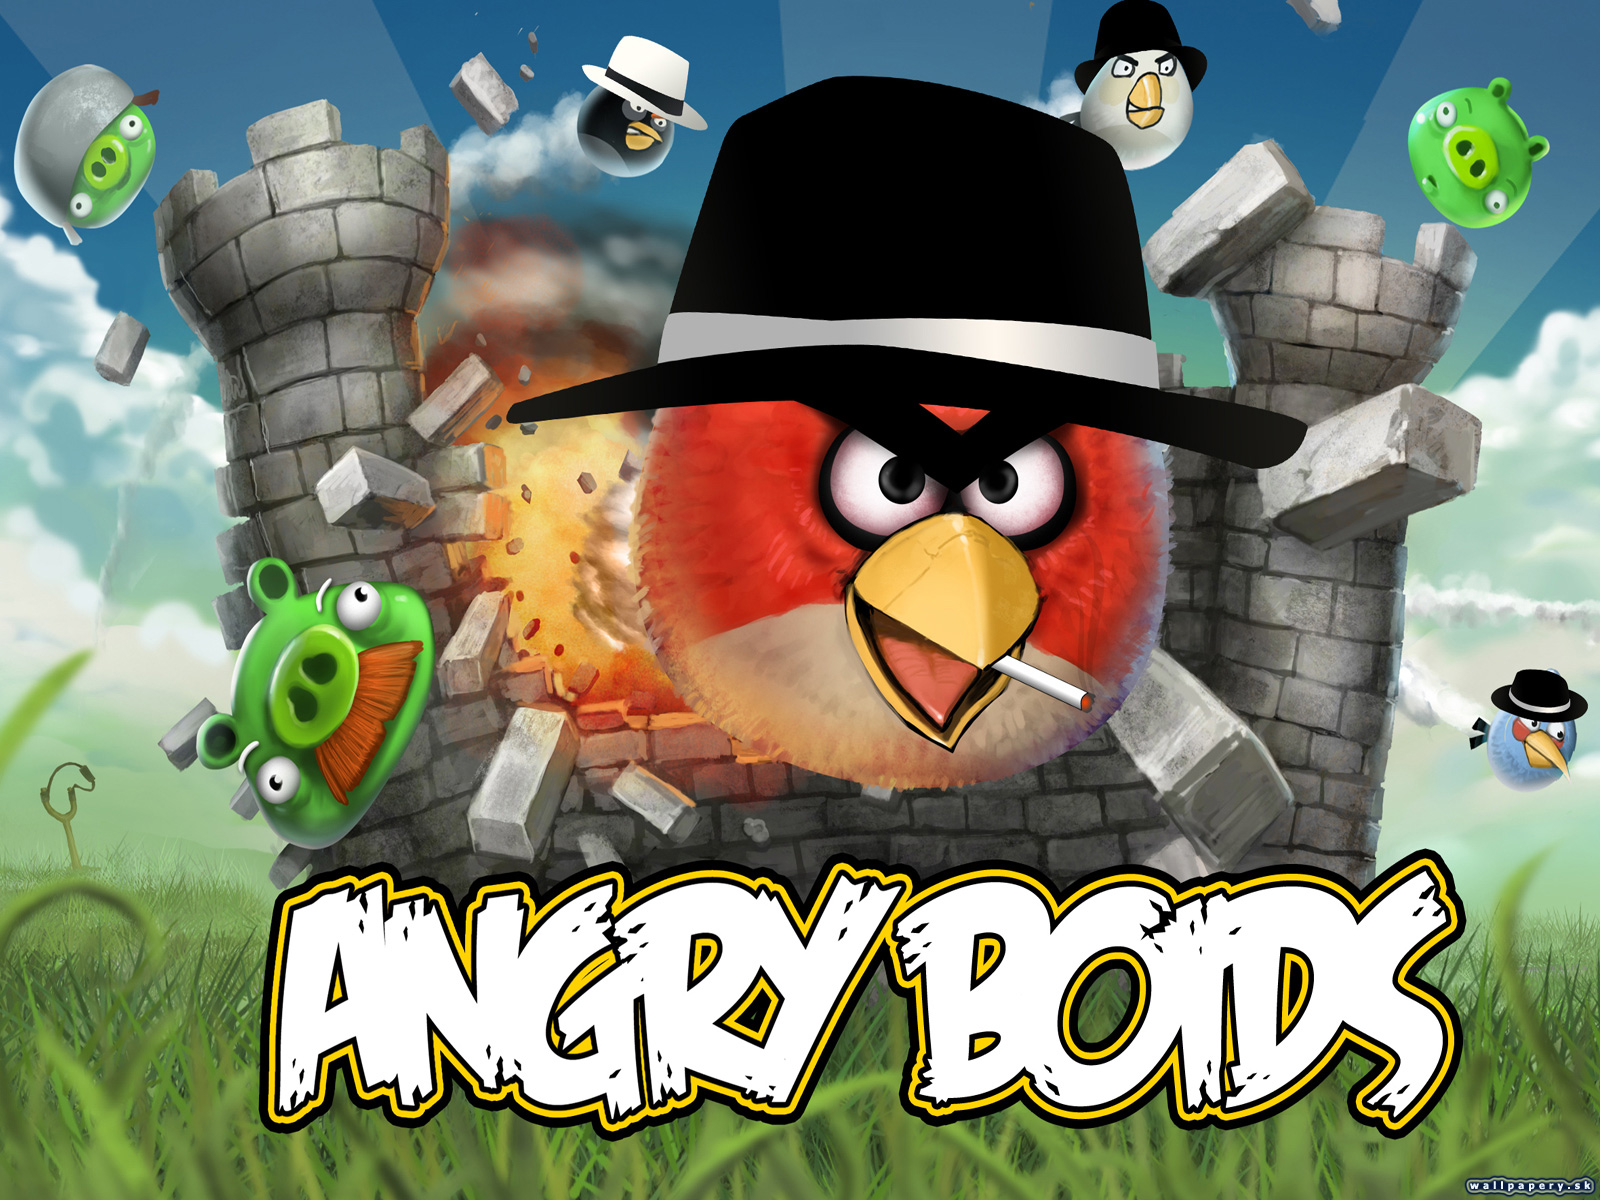 Angry Birds - wallpaper 3